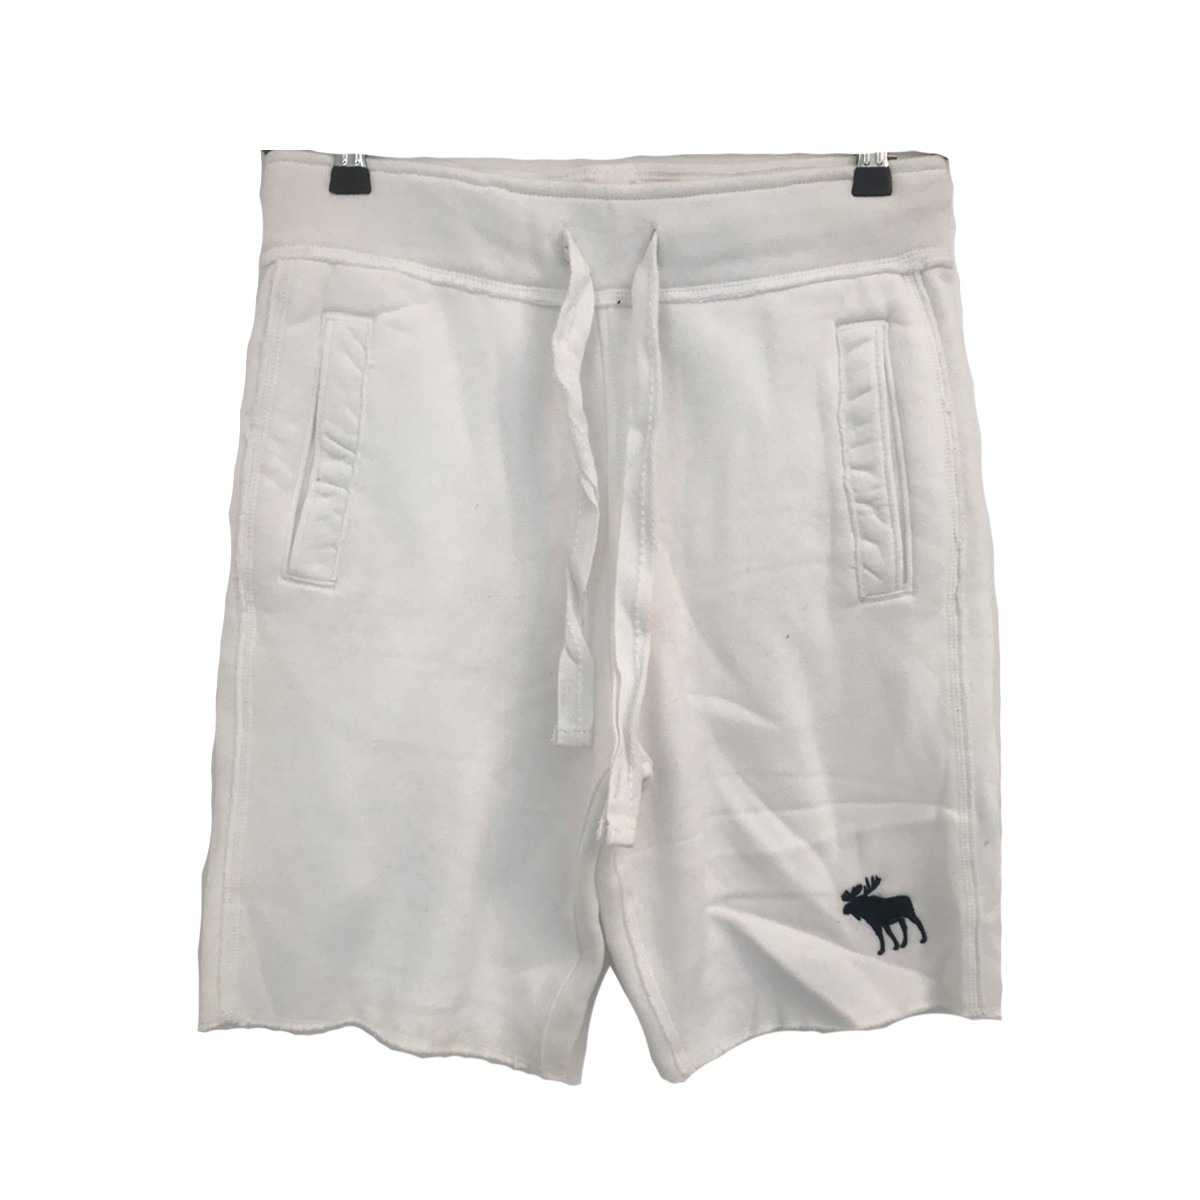 abercrombie and fitch white shorts